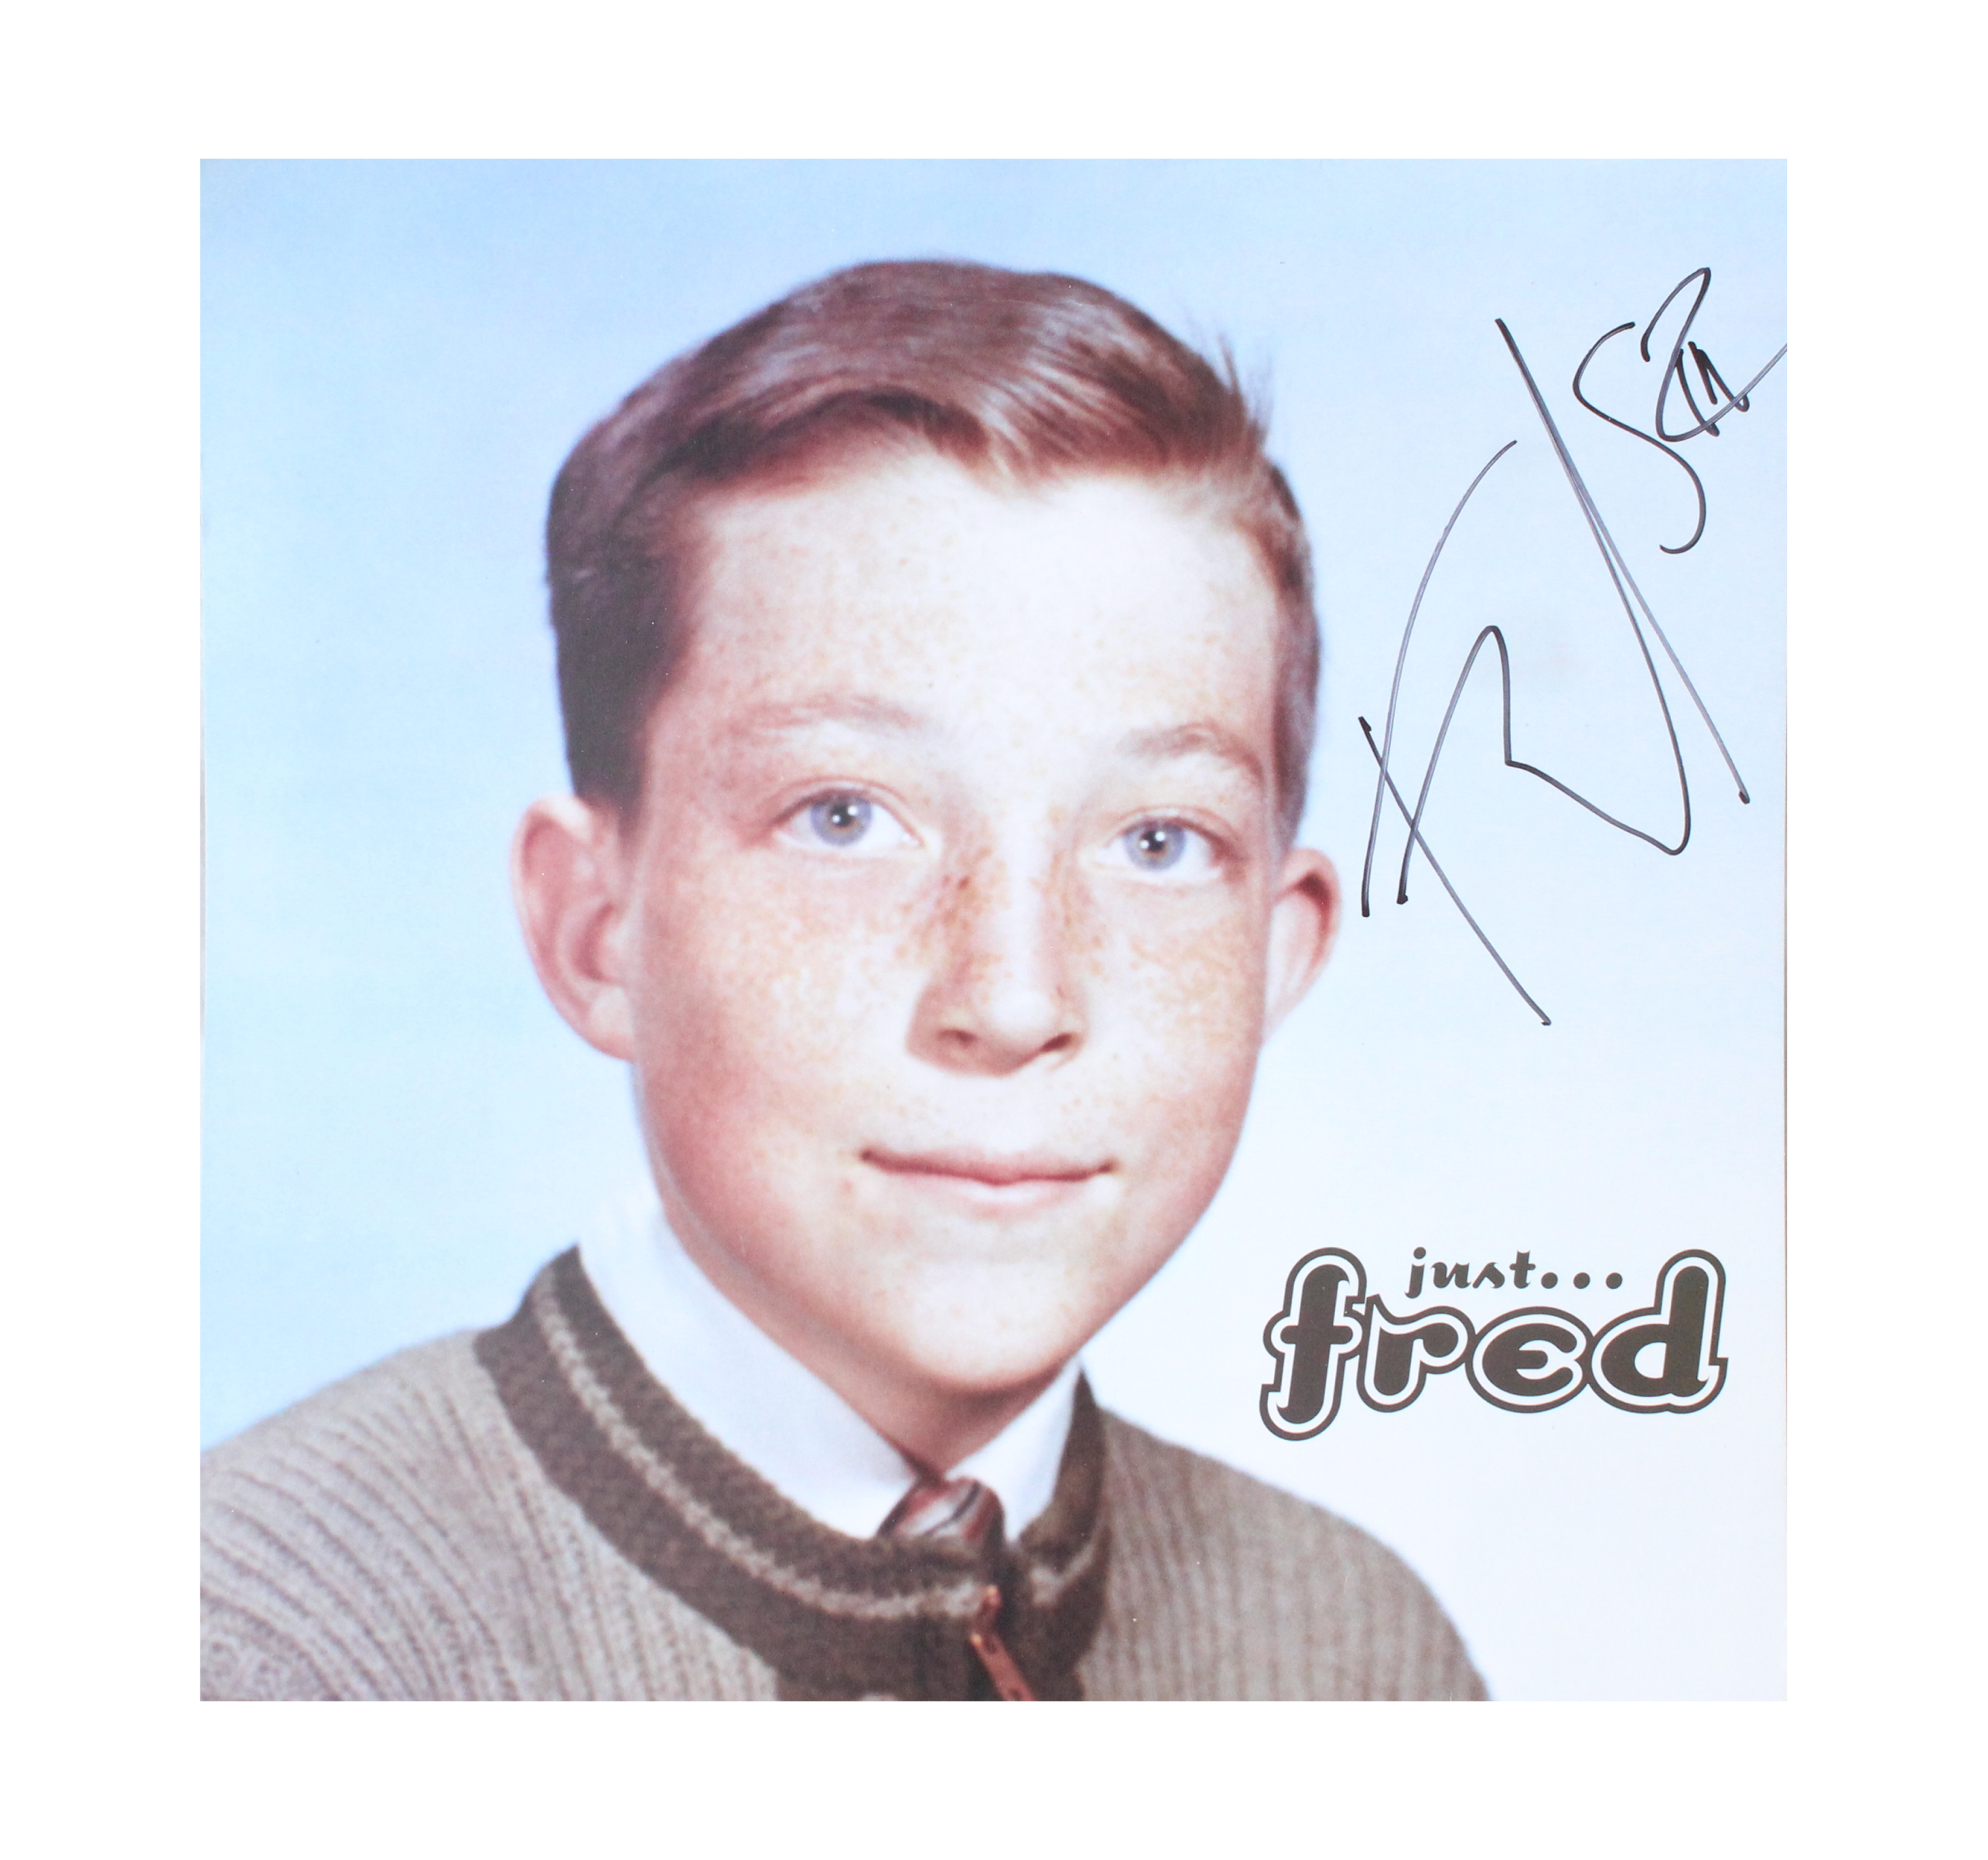 "Just Fred" Signed Album Cover